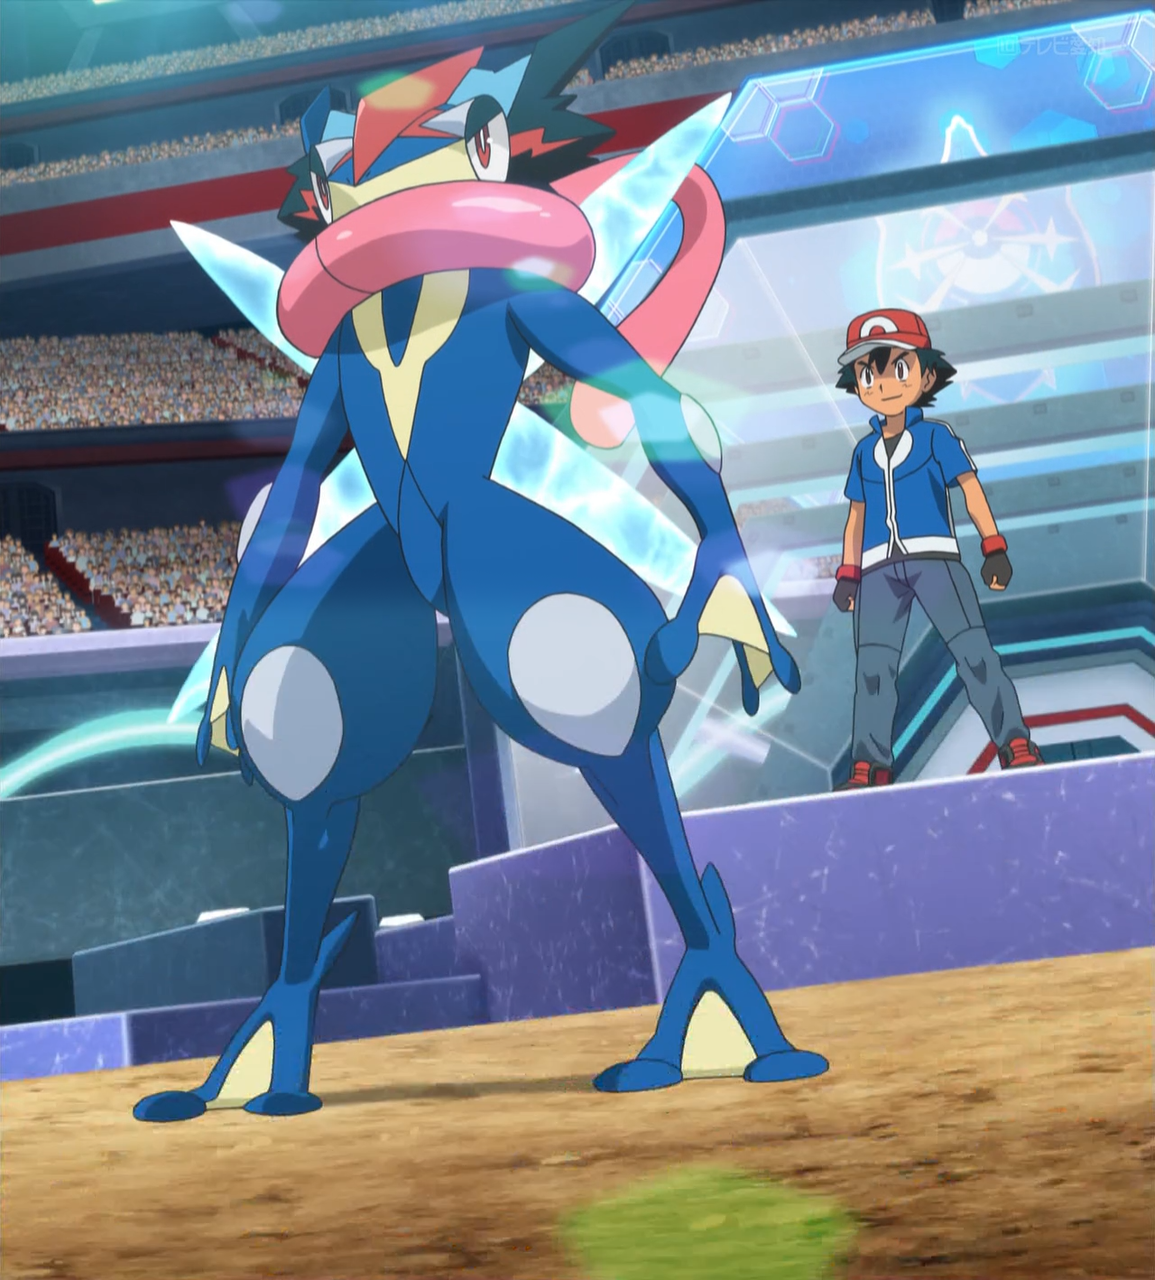 Why is Ash-Greninja form not considered a Mega evolution? - Quora